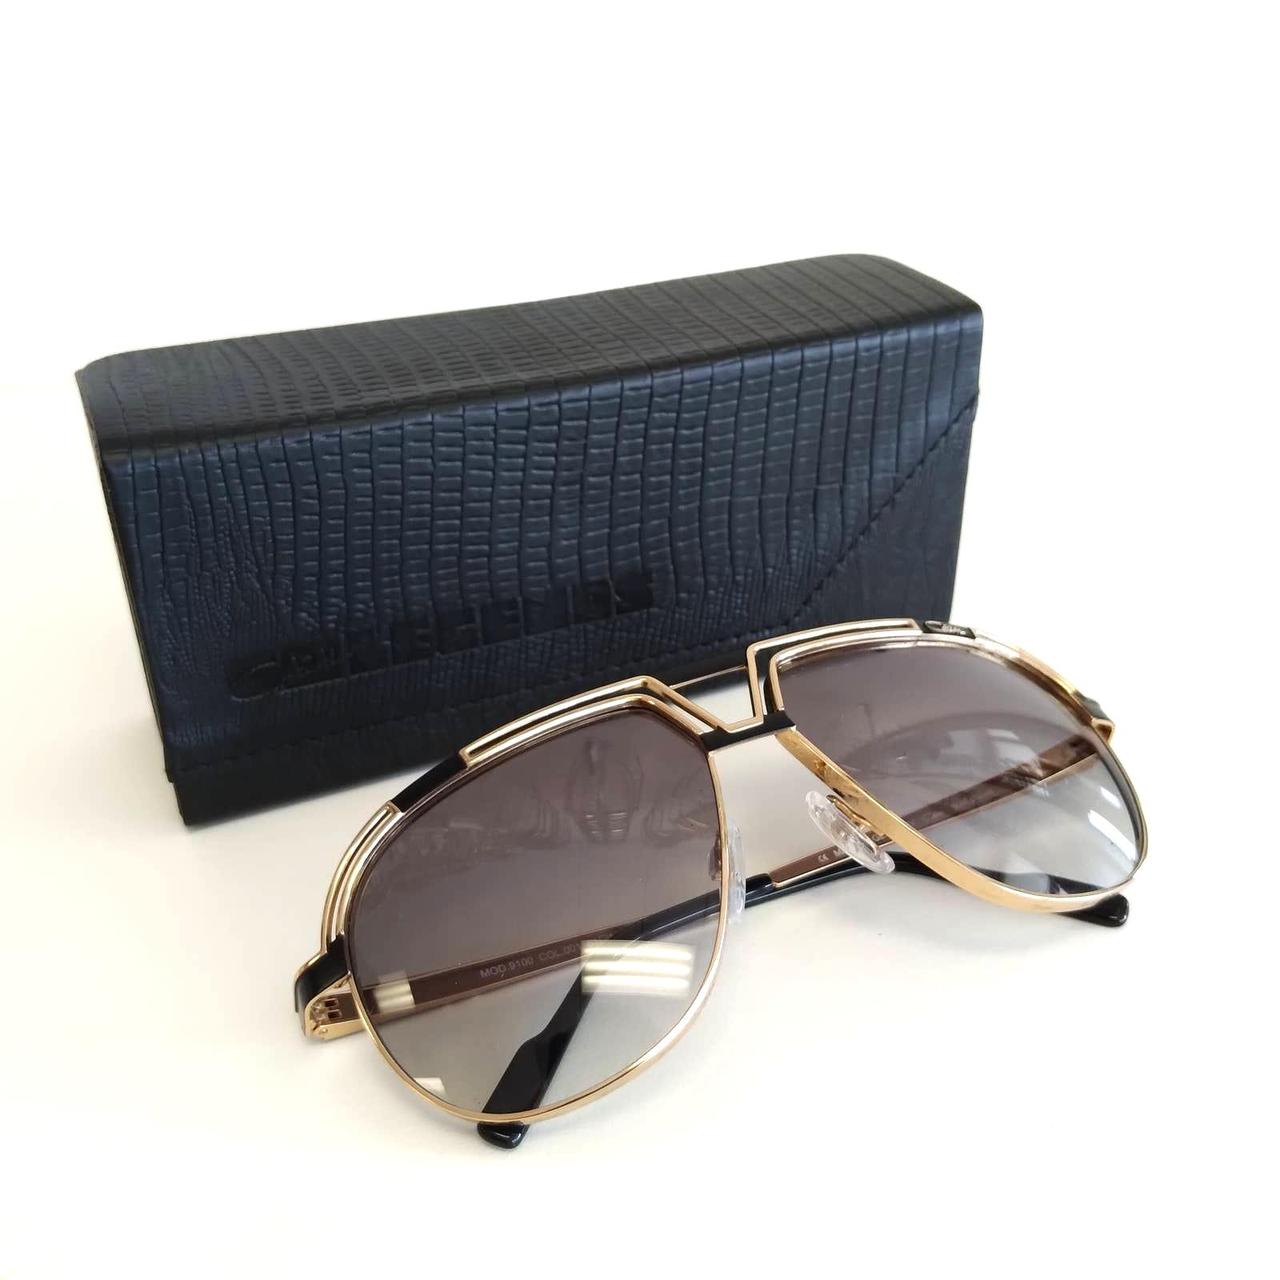 Product Image 2 - Brand: Cazal
Model: 9100
Style: Pilot
Frame/Temple Color: